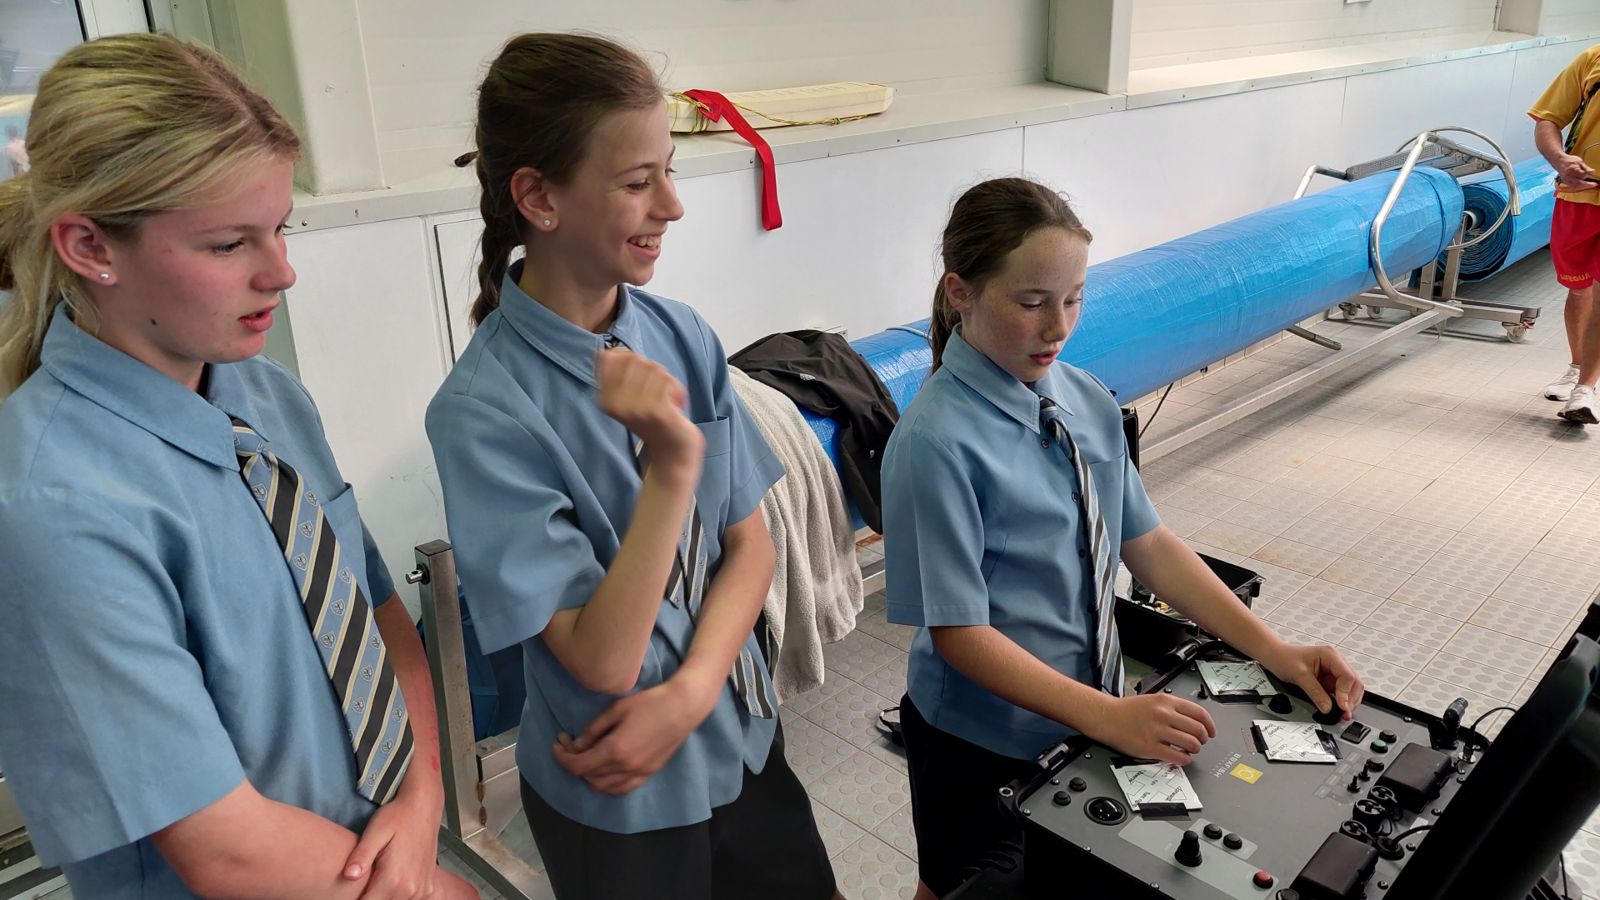 Students driving underwater drone in swimming pool